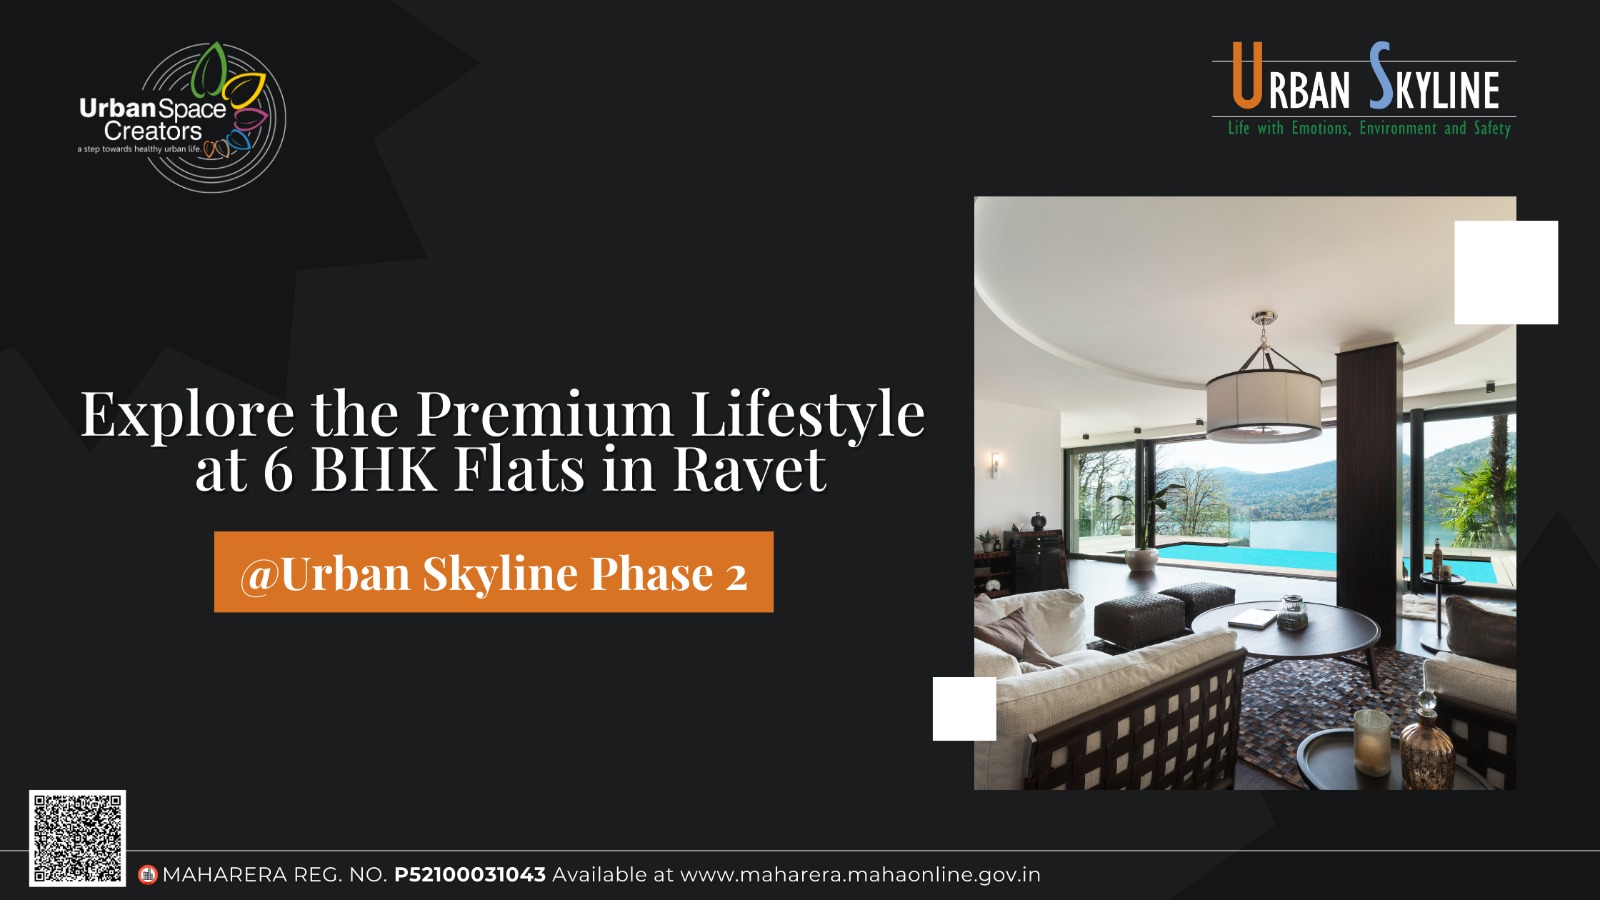 Explore the Premium Lifestyle at 6 BHK Flats in Ravet at Urban Skyline Phase 2